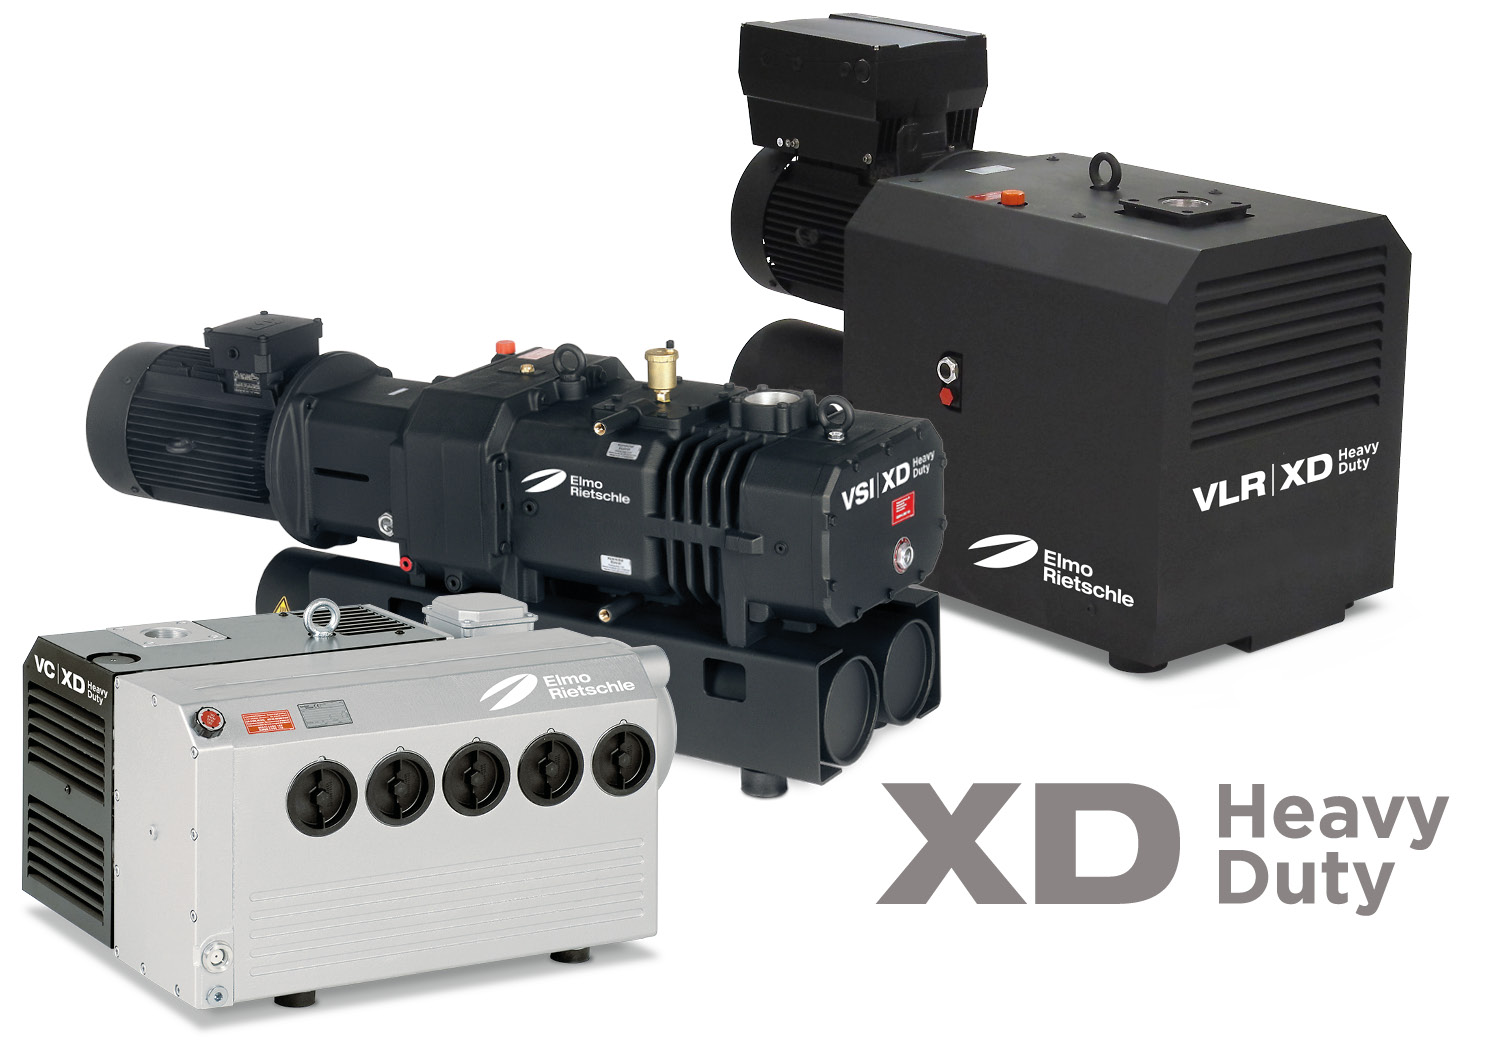 The XD range from Elmo Rietschle is suitable for demanding applications.